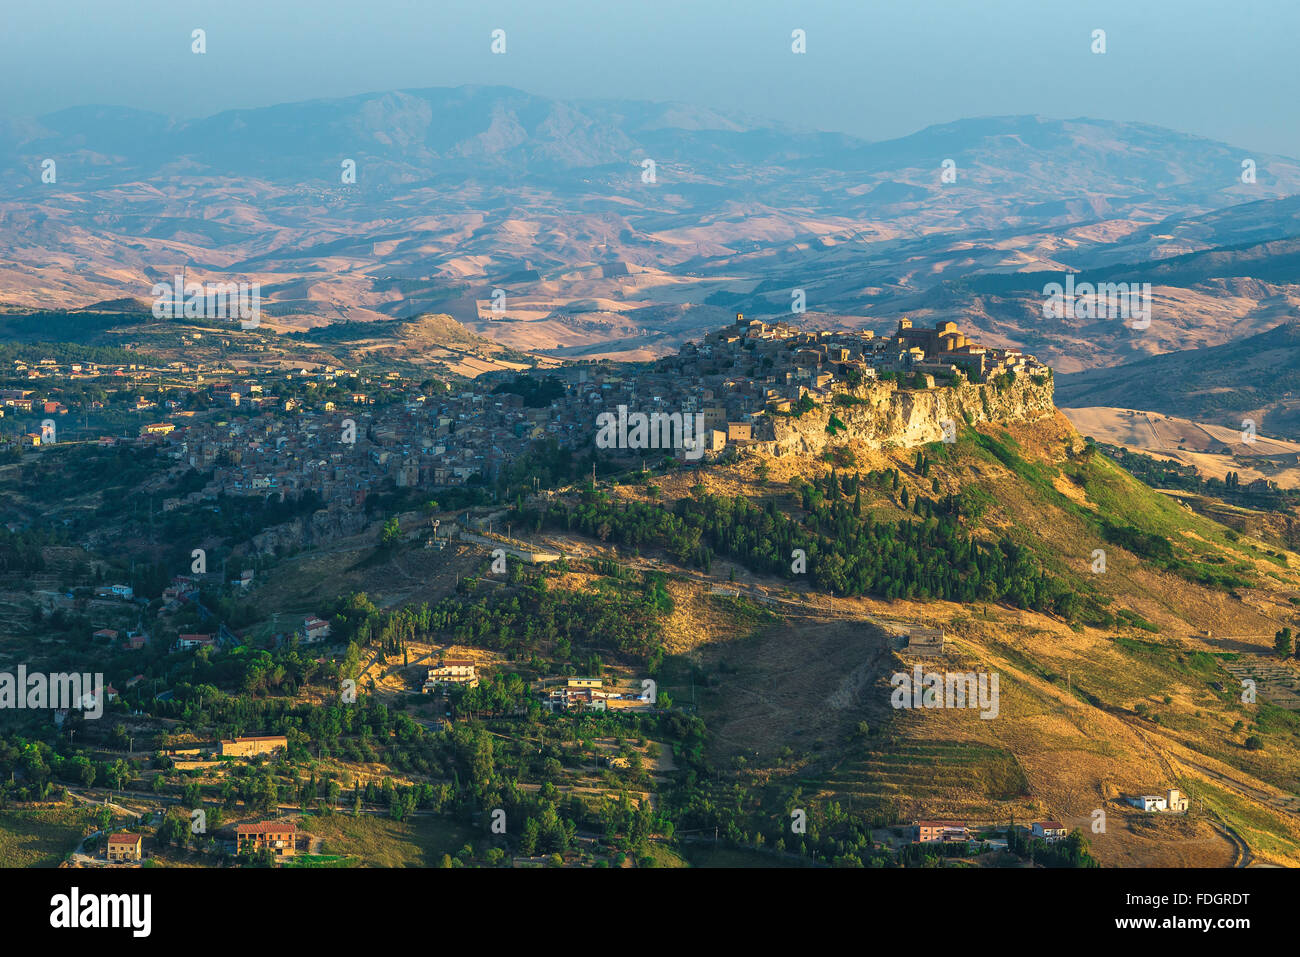 Calascibetta Sicily, aerial view at sunrise of the historic hill-top town of Calascibetta, close neighbour to the city of Enna, Sicily. Stock Photo